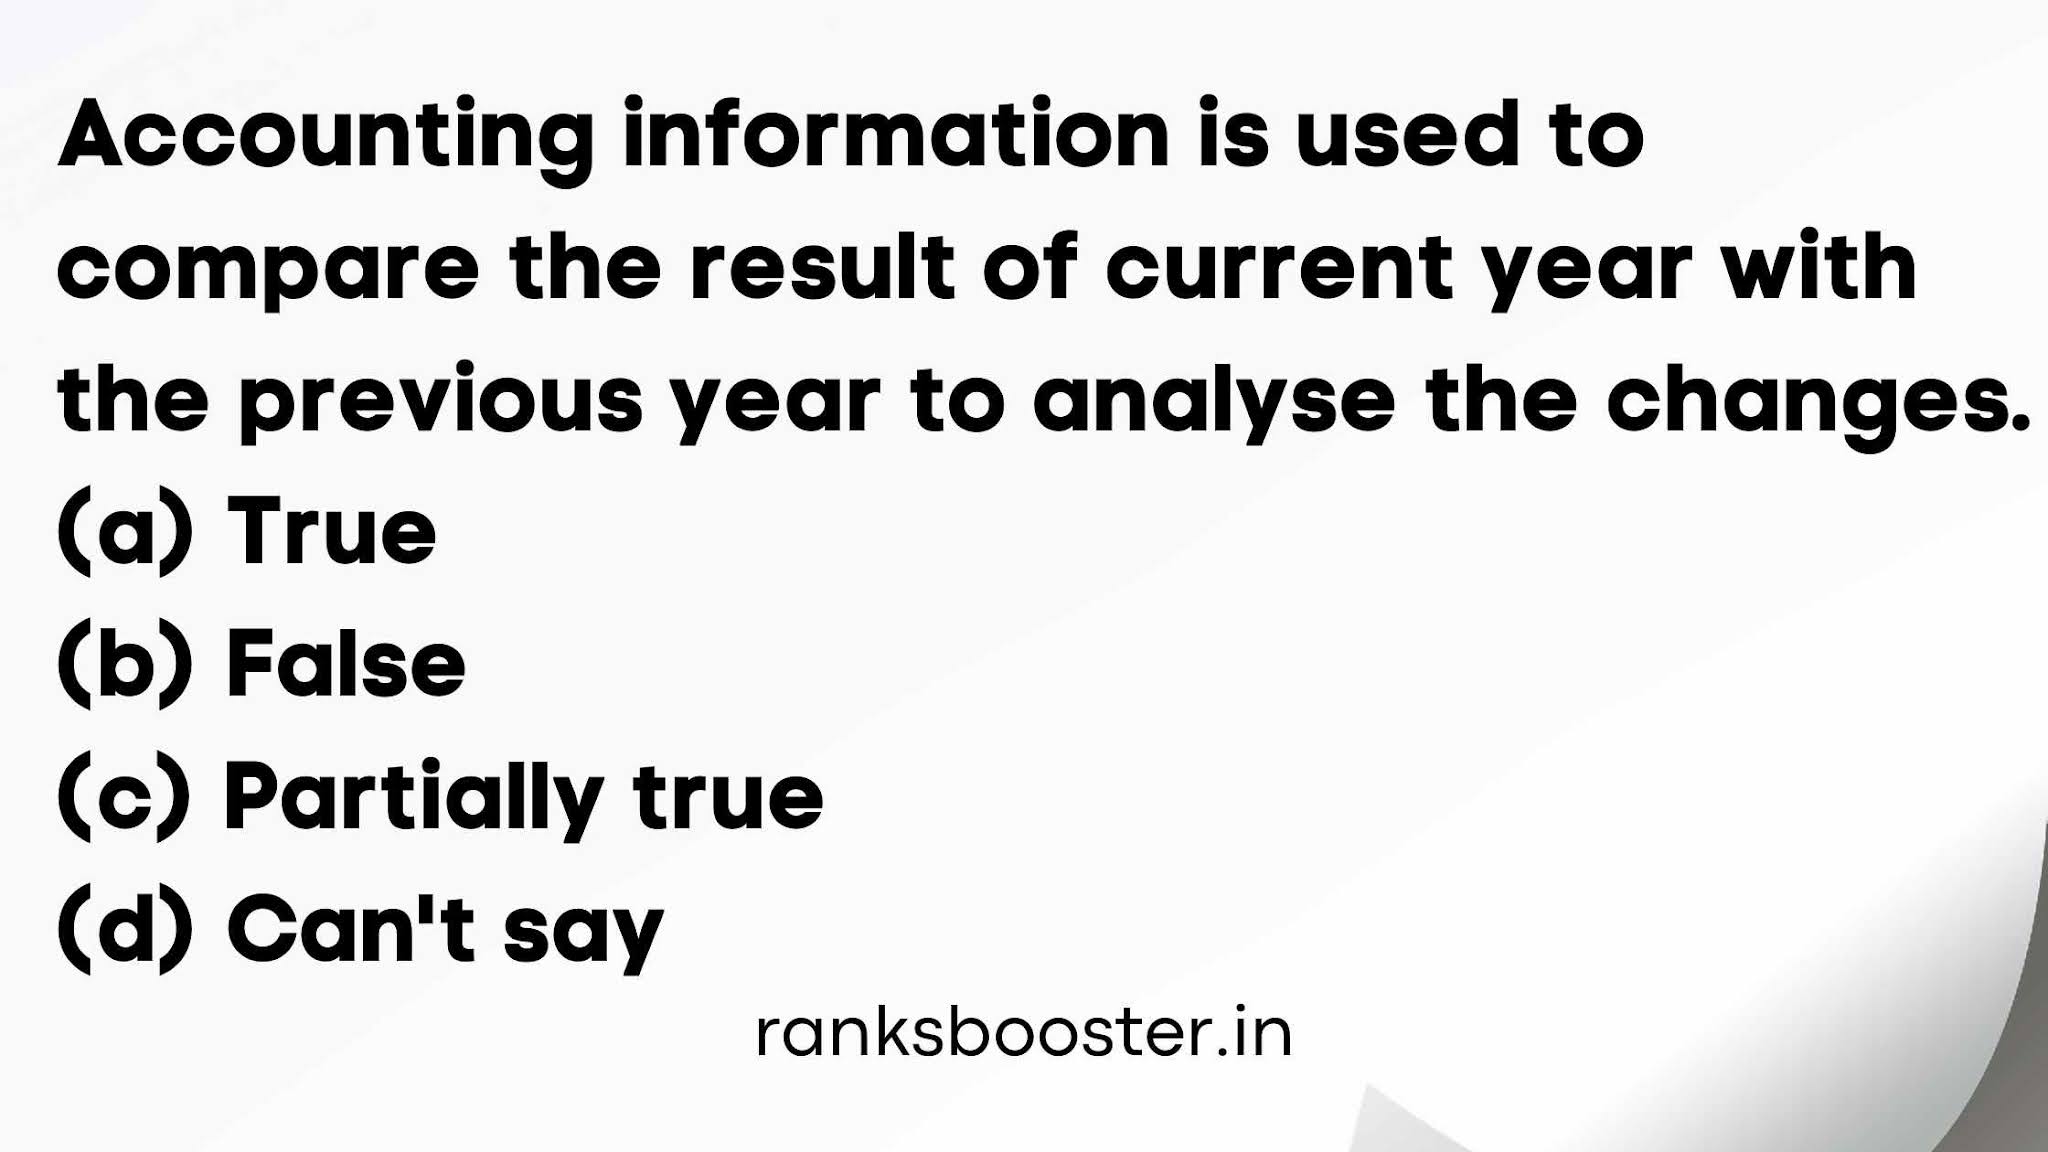 Accounting information is used to compare the result of current year with the previous year to analyse the changes. (a) True (b) False (c) Partially true (d) Can't say